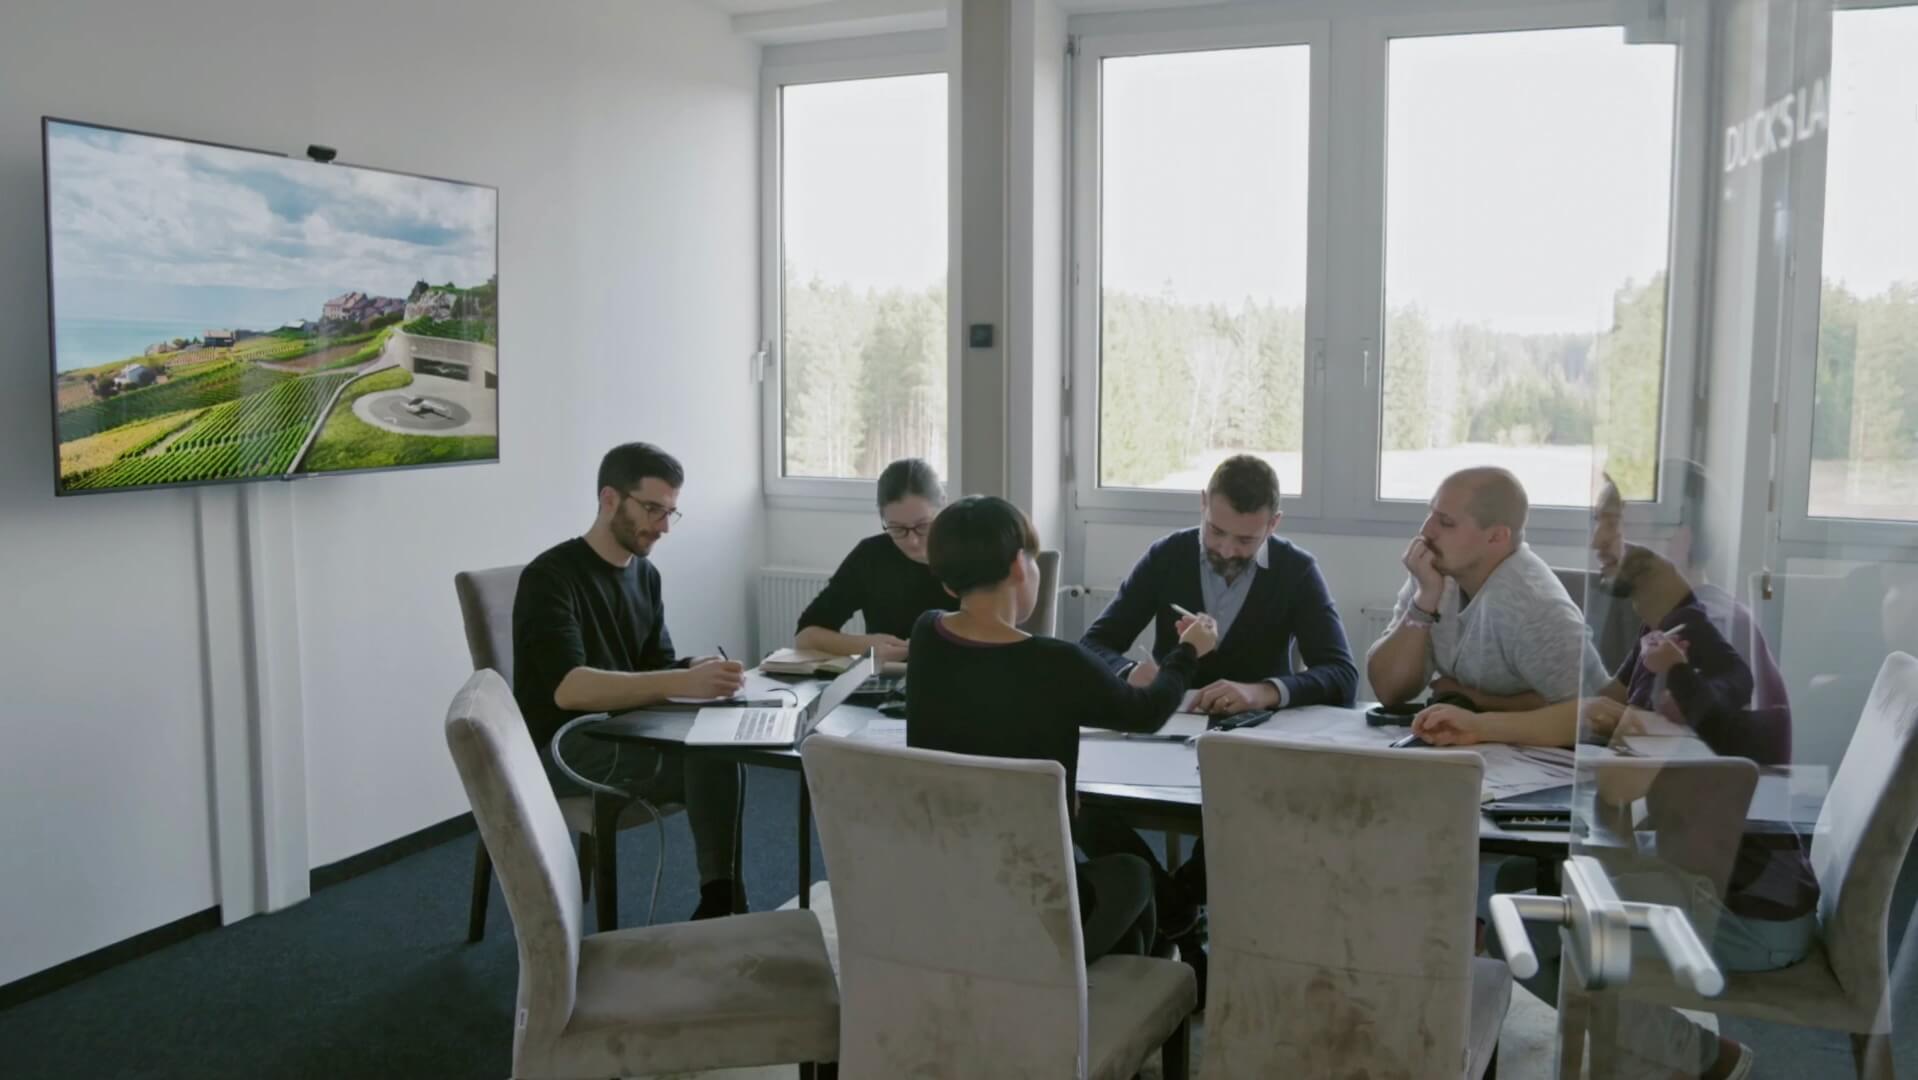 Lilium employees working at a desk